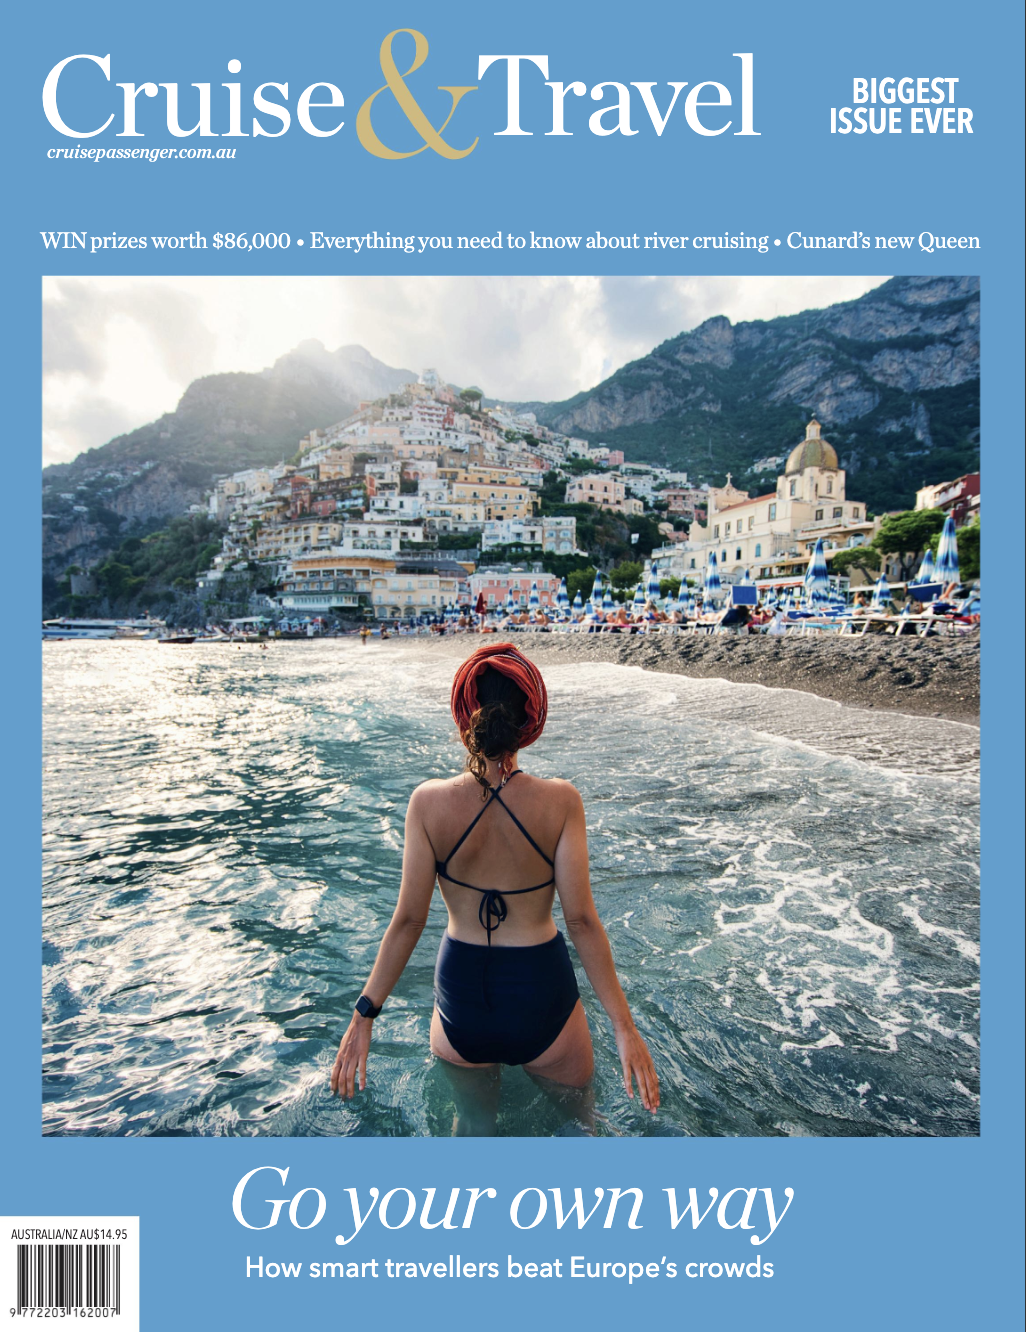 magazine cover for Cruise & Travel "Go your own way" edition